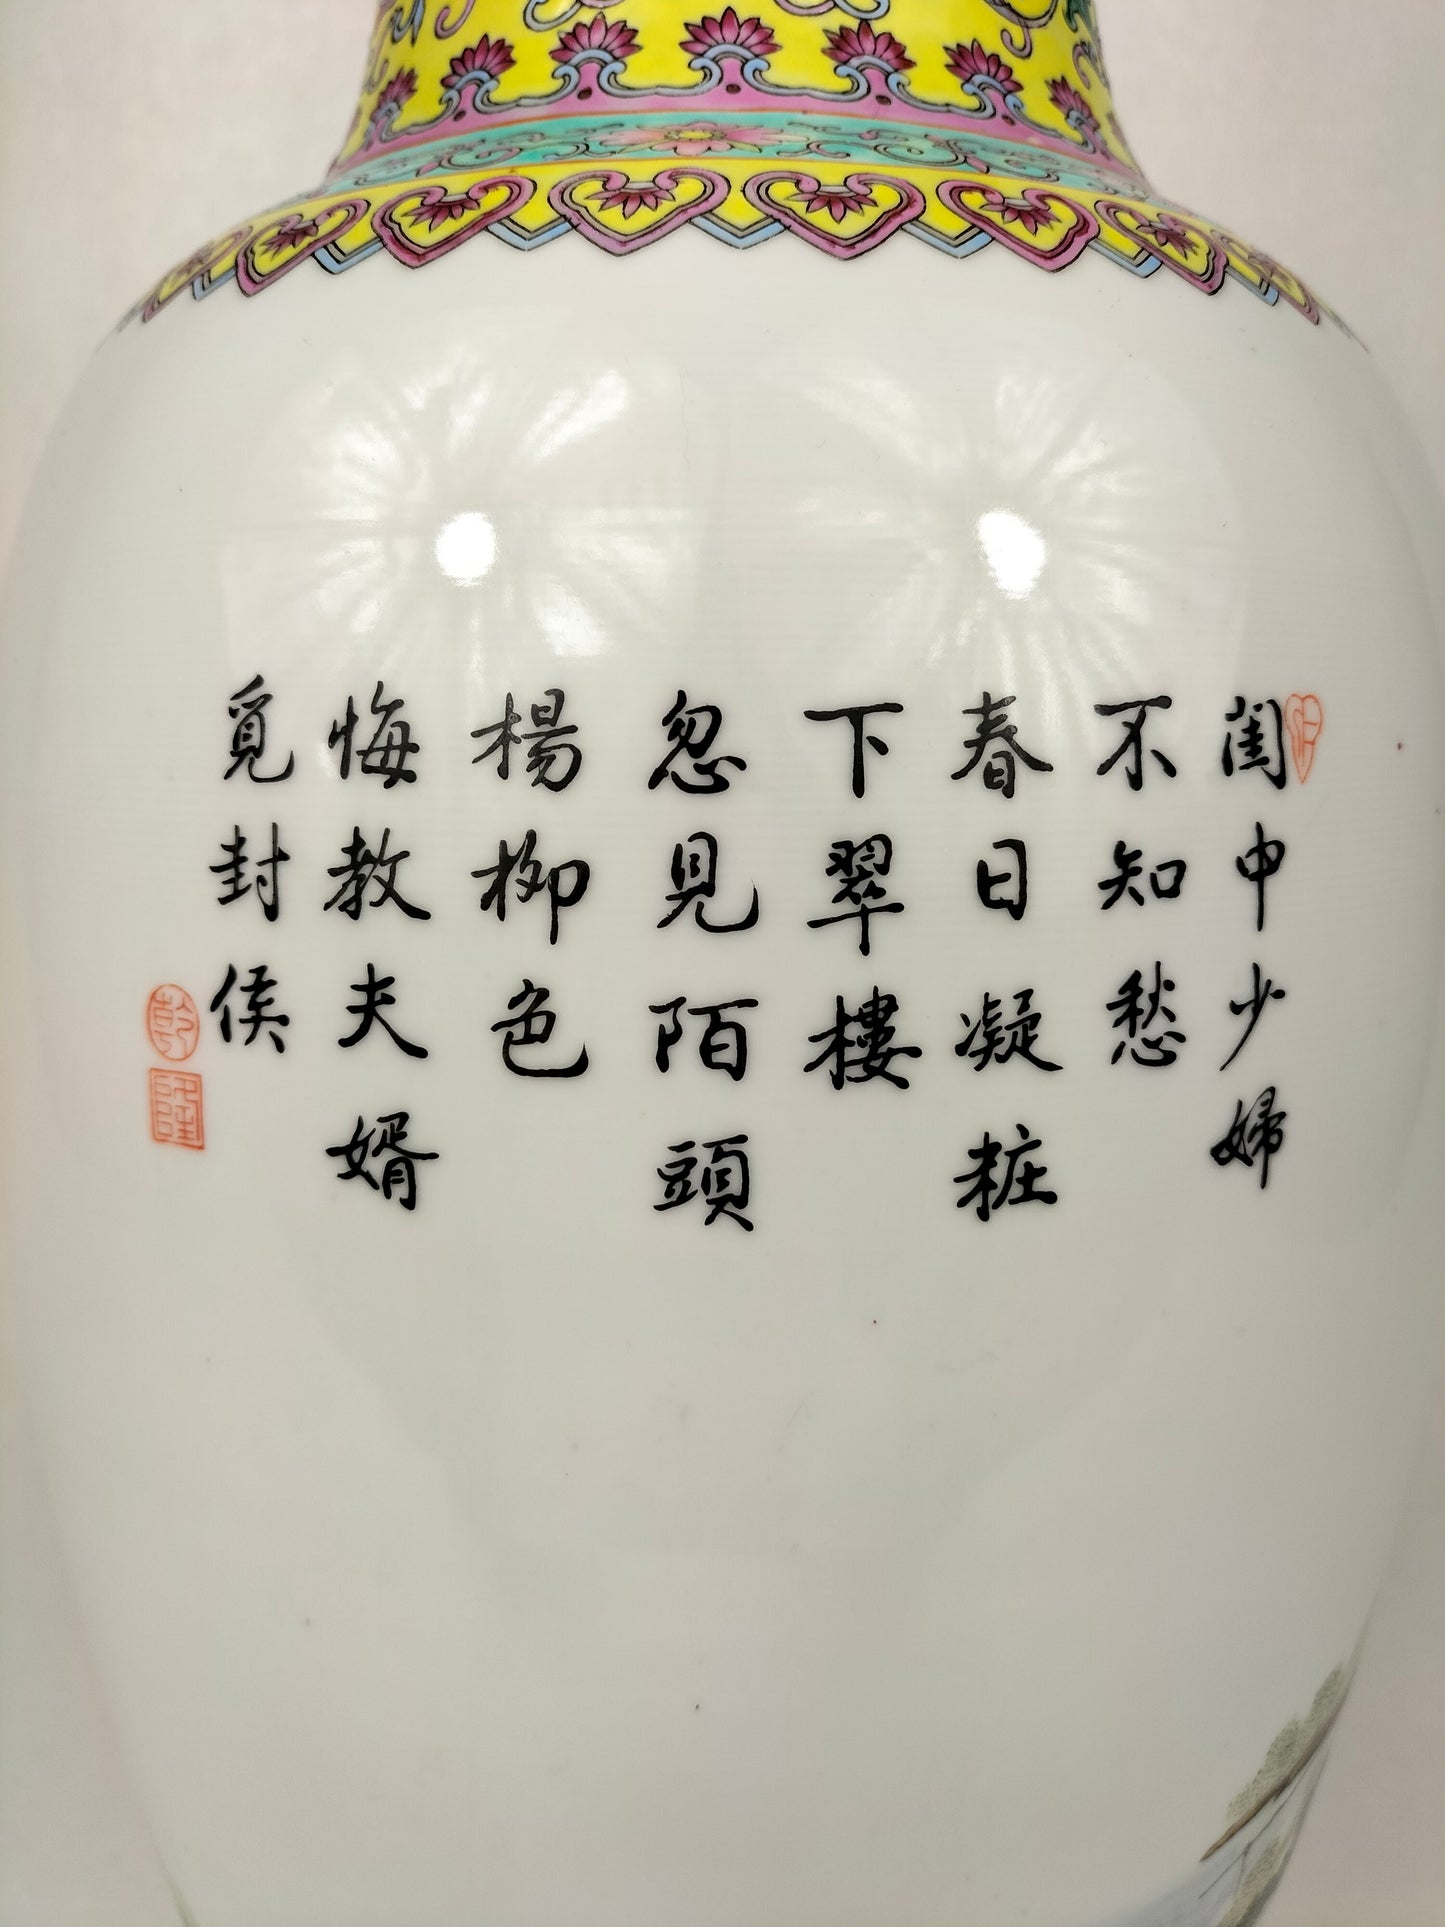 Chinese famille rose vase decorated with a garden scene // Jingdezhen - Qianlong mark - 20th century